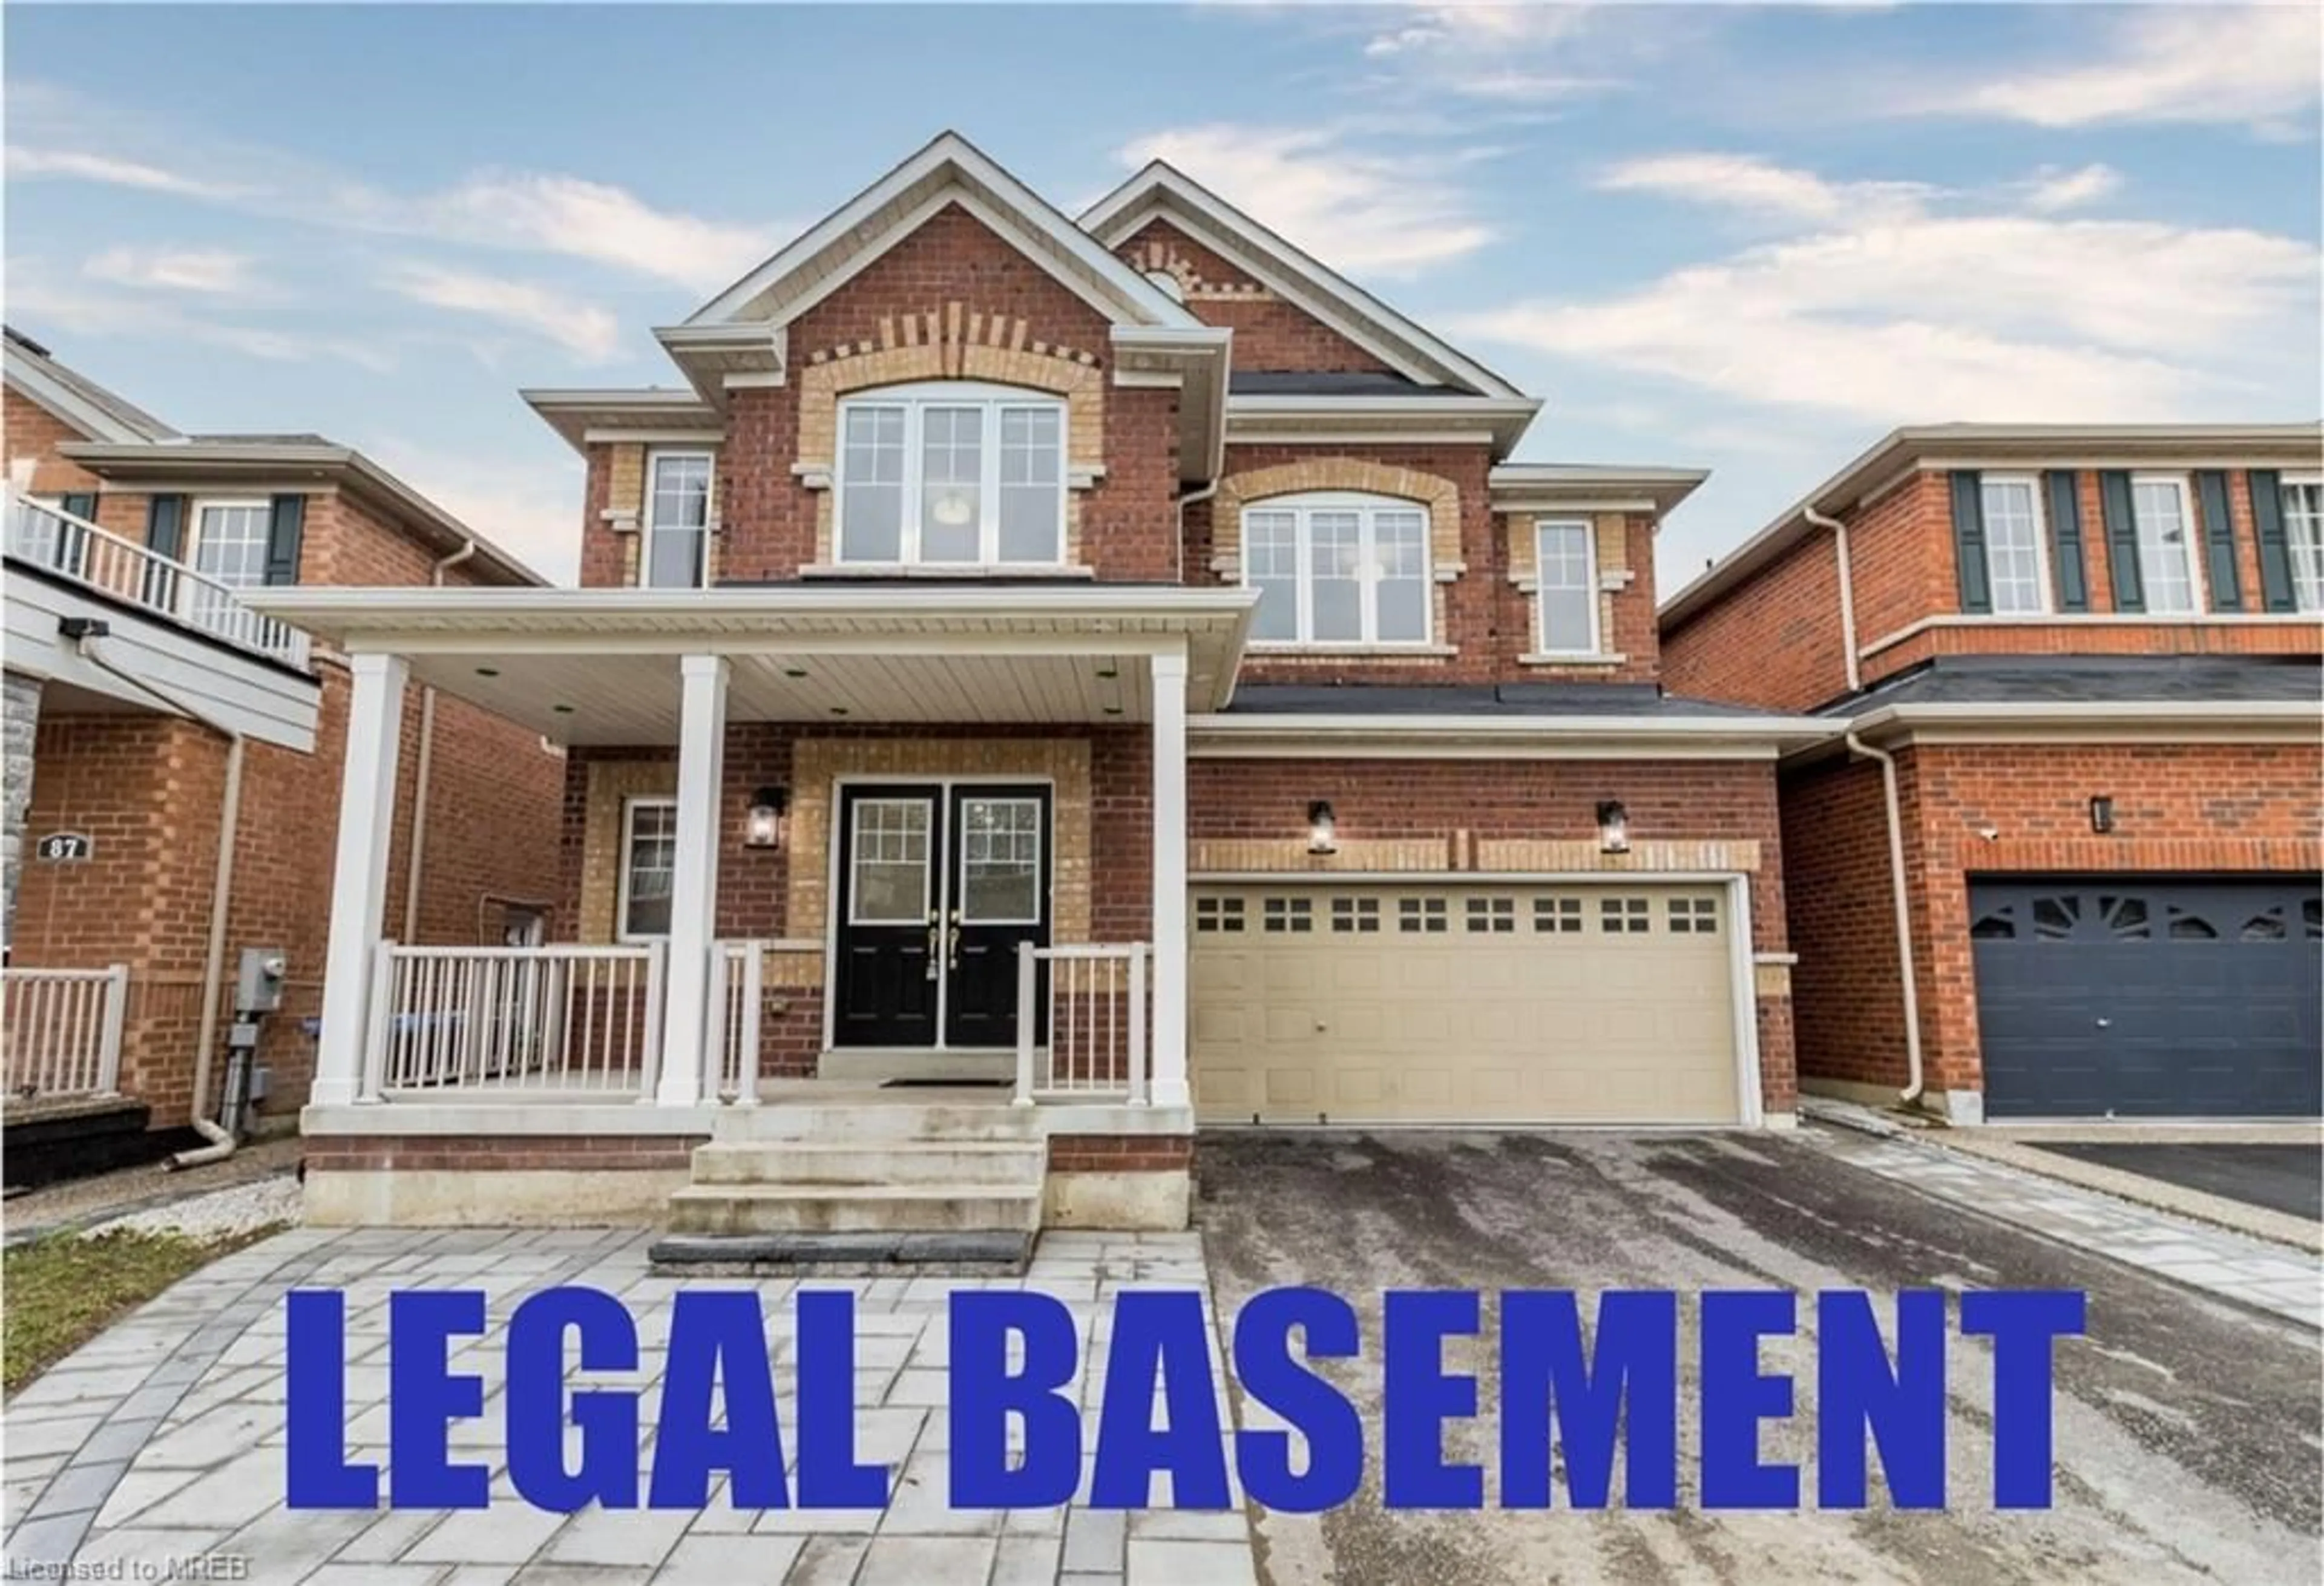 Home with brick exterior material for 85 Cookview Dr, Brampton Ontario L6R 3V1